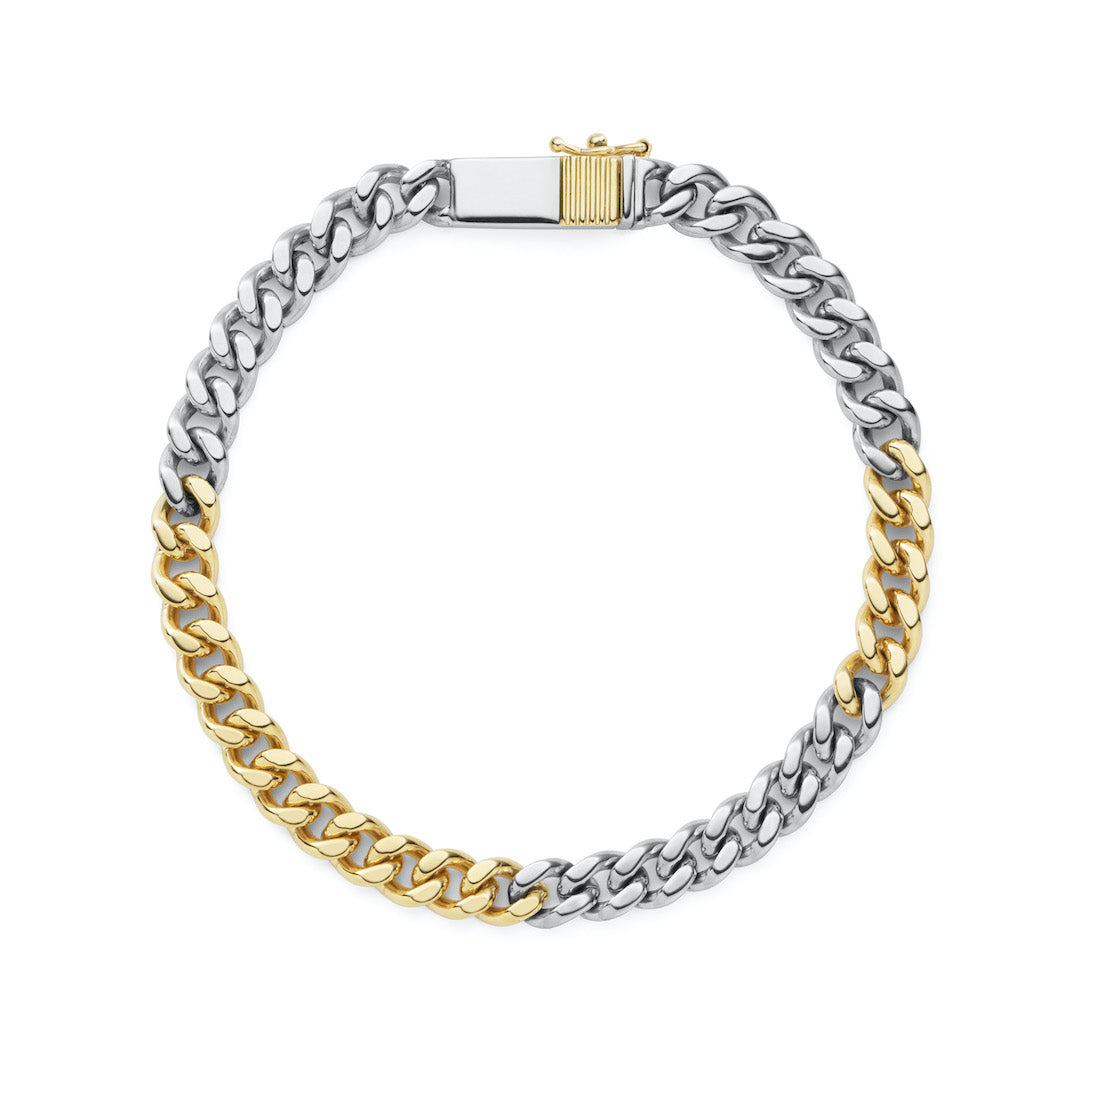 18K　Silver　Combination　コンビネーション　Curb Chain　カーブチェーン　Bracelet　ブレスレット